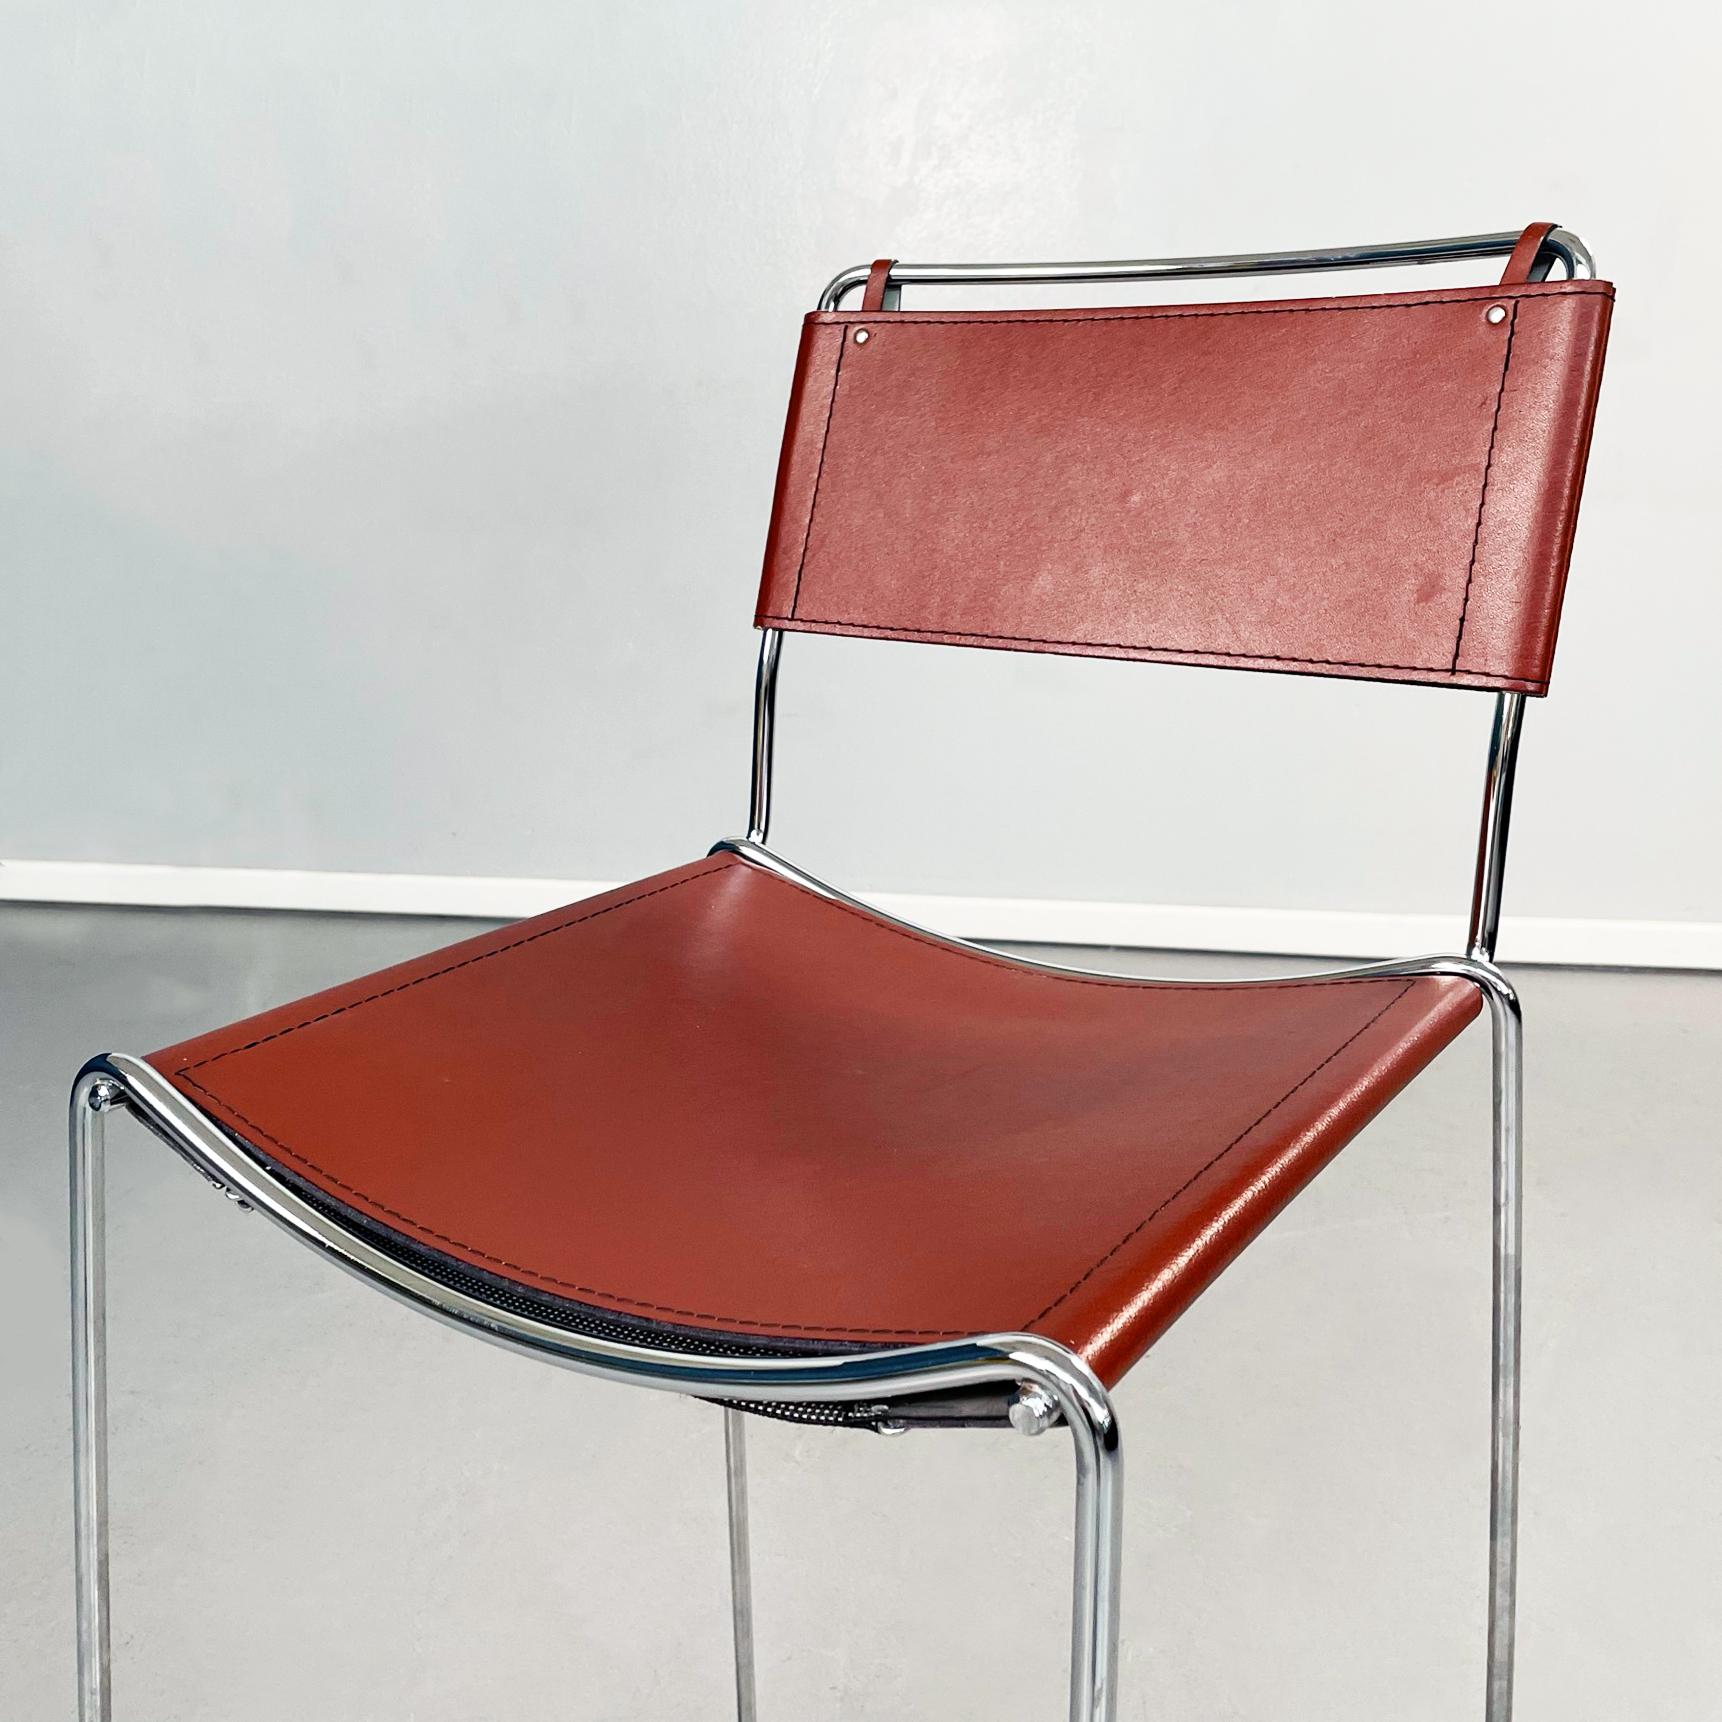 Italian Mid-Century Modern Brown Leather and Steel High Stool, 1980s For Sale 1